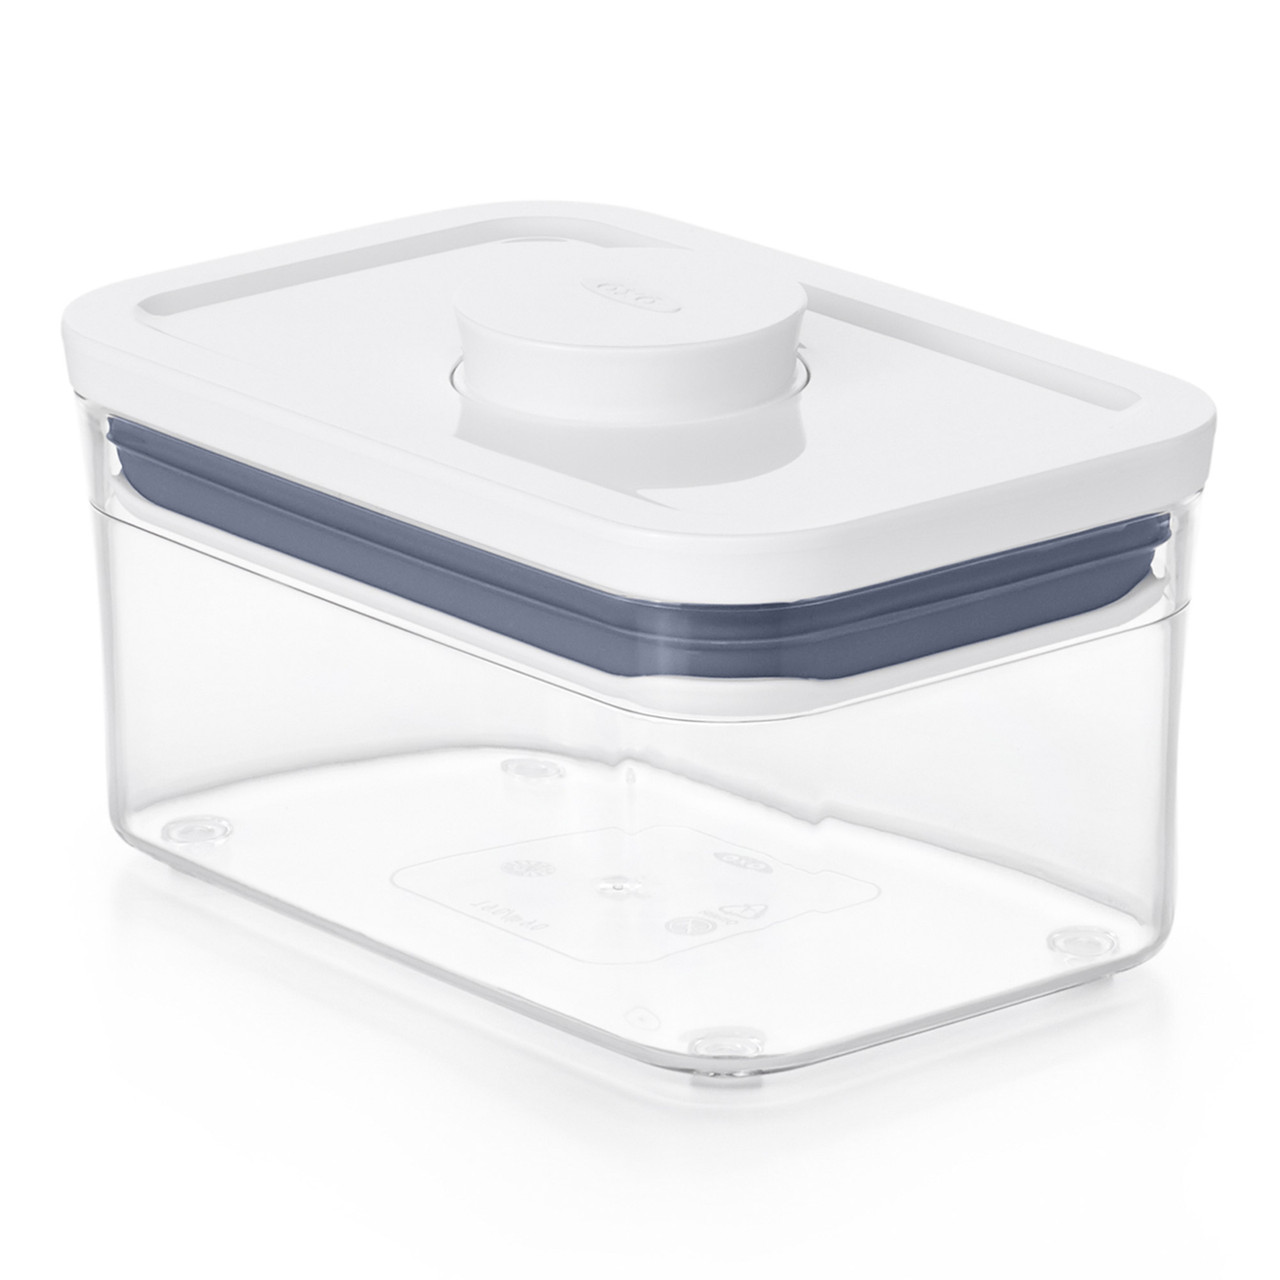 OXO Good Grips POP Container (Rectangle, Mini, 0.6qt) – The Baby